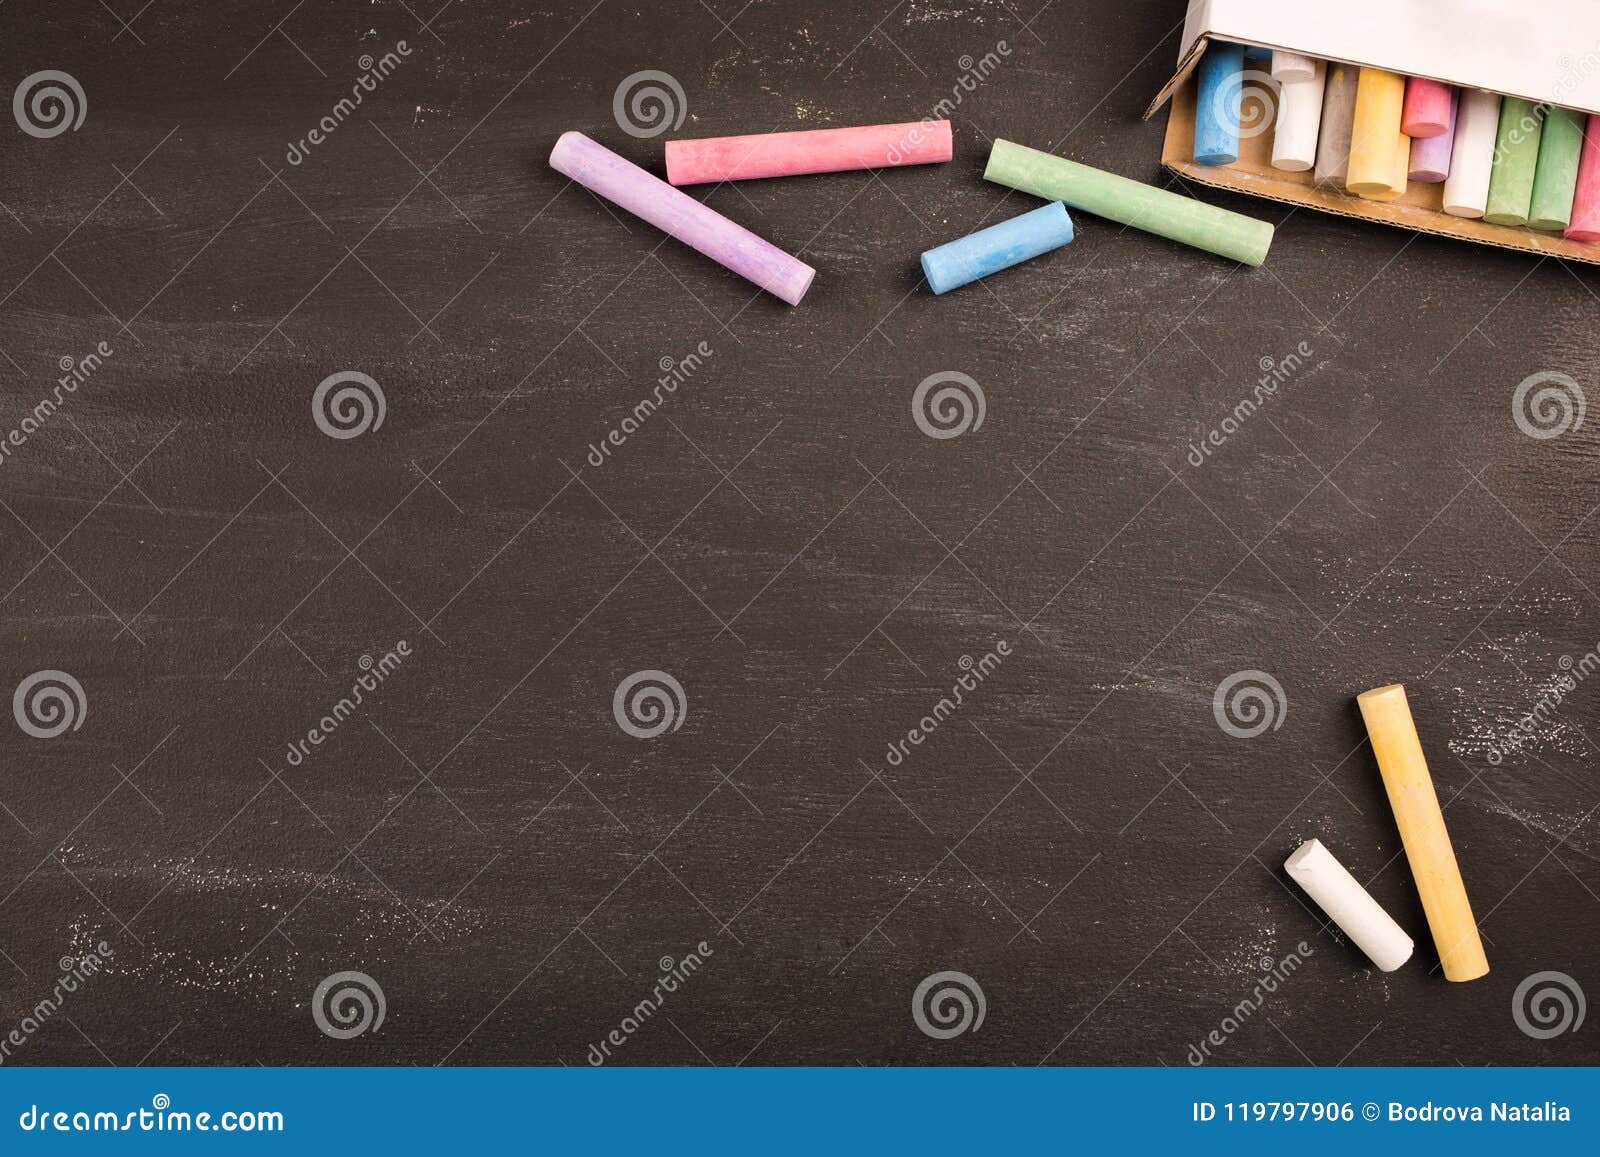 19,600+ Black Crayons Stock Photos, Pictures & Royalty-Free Images